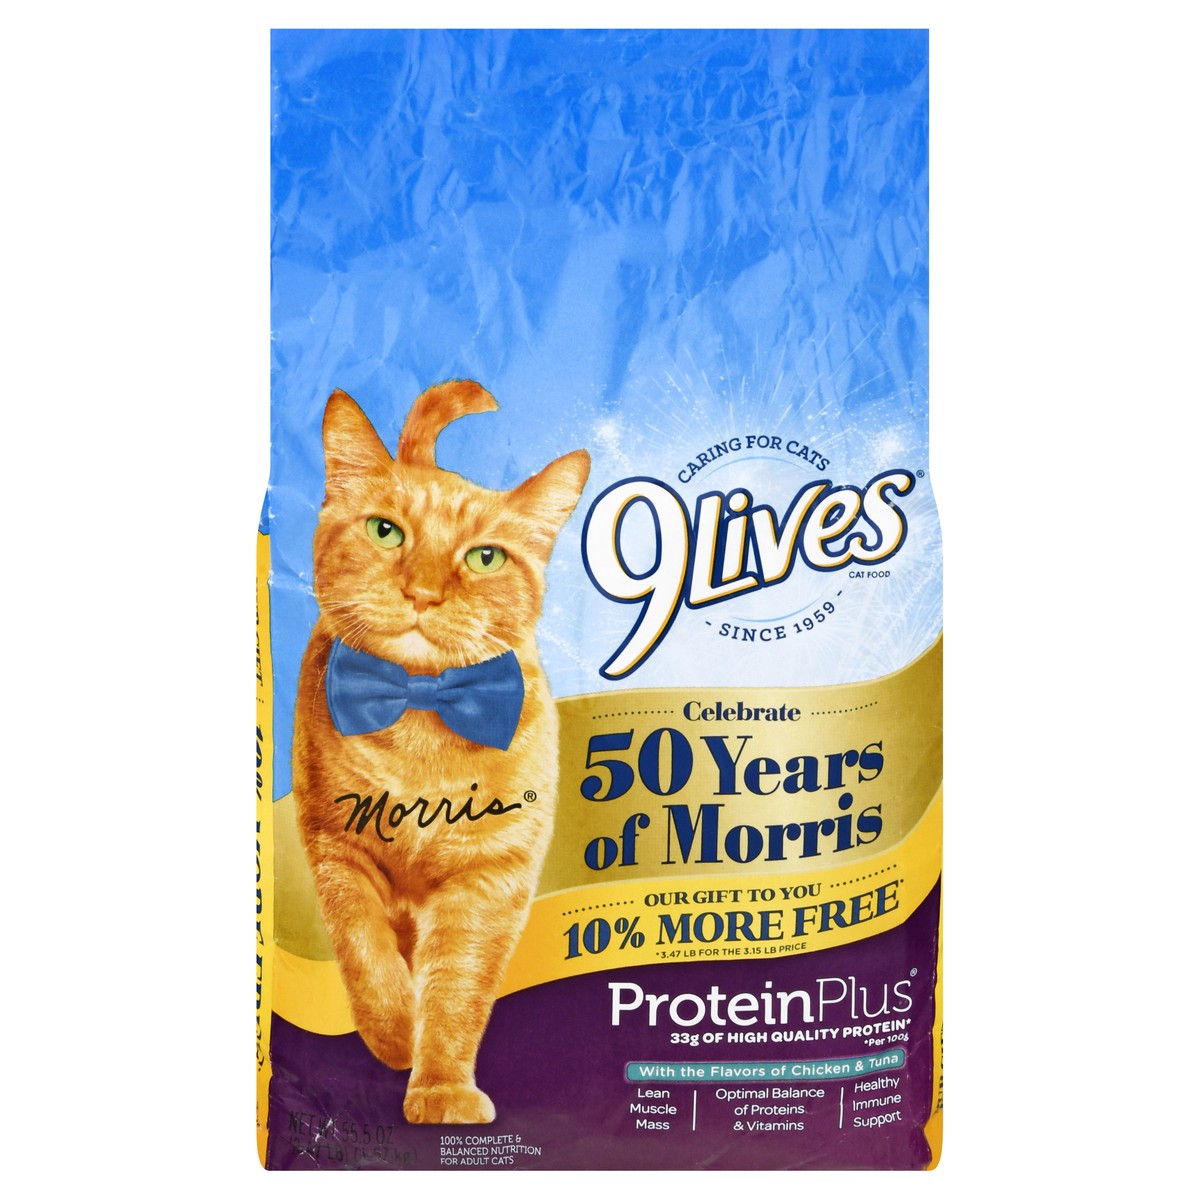 slide 1 of 9, 9Lives Protein Plus Dry Cat Food with Flavors of Chicken & Tuna, 3.47 lb